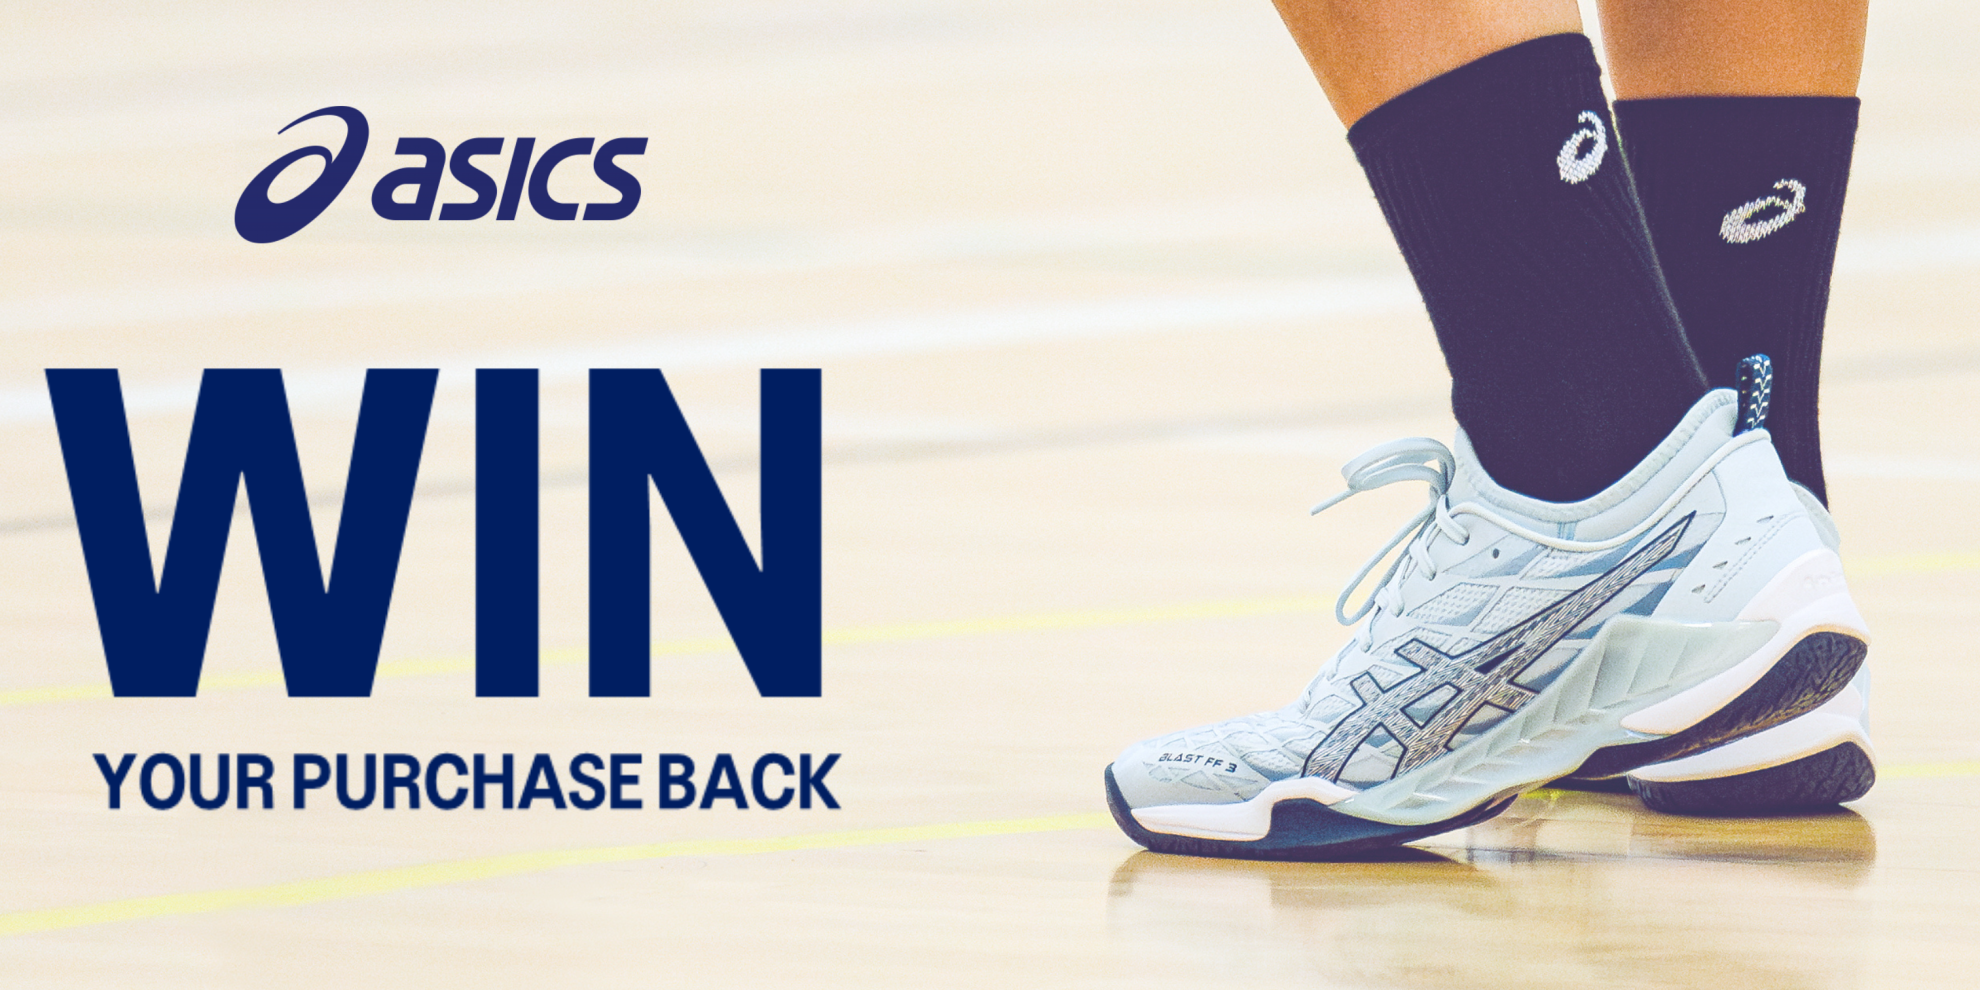 Win your ASICS purchase back!